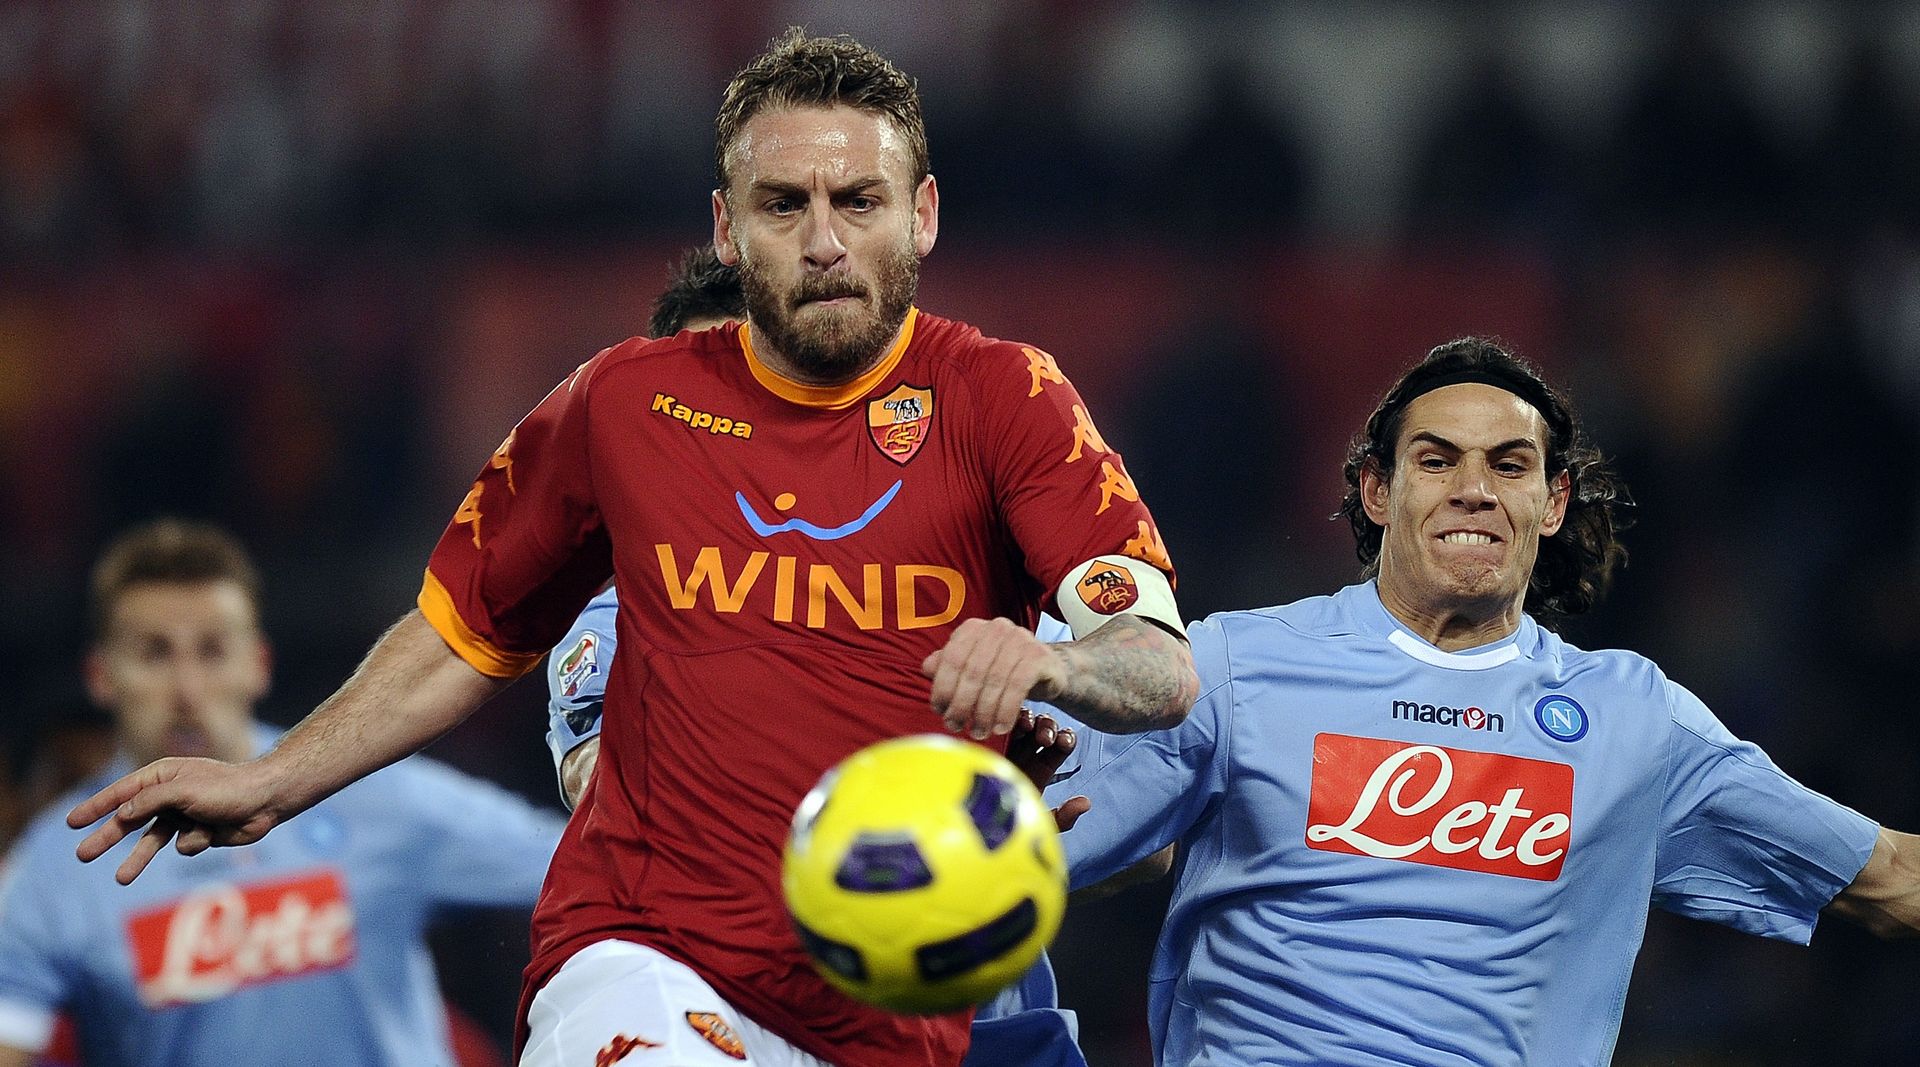 <p>                     Daniele De Rossi was well-established in Roma’s midfield by the beginning of the 10s – and the 2006 World Cup winner went from strength to strength in the new decade.                   </p>                                      <p>                     Ever-reliable, De Rossi left Roma for Boca Juniors in 2019 – having amassed more than 400 Serie A appearances for his hometown club.                   </p>